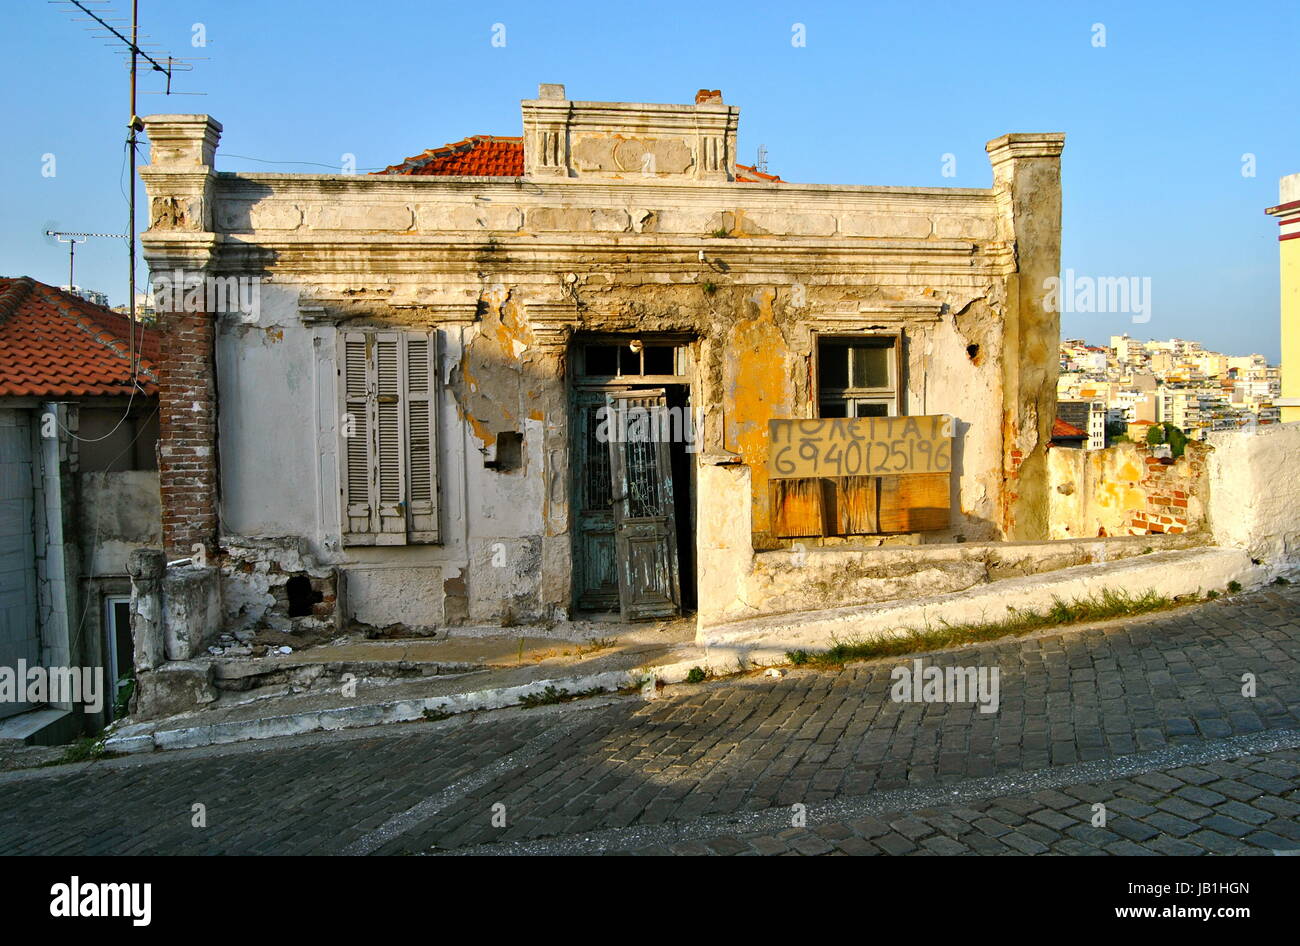 Dilapidated building, Old Town, Kavala, Greece Stock Photo